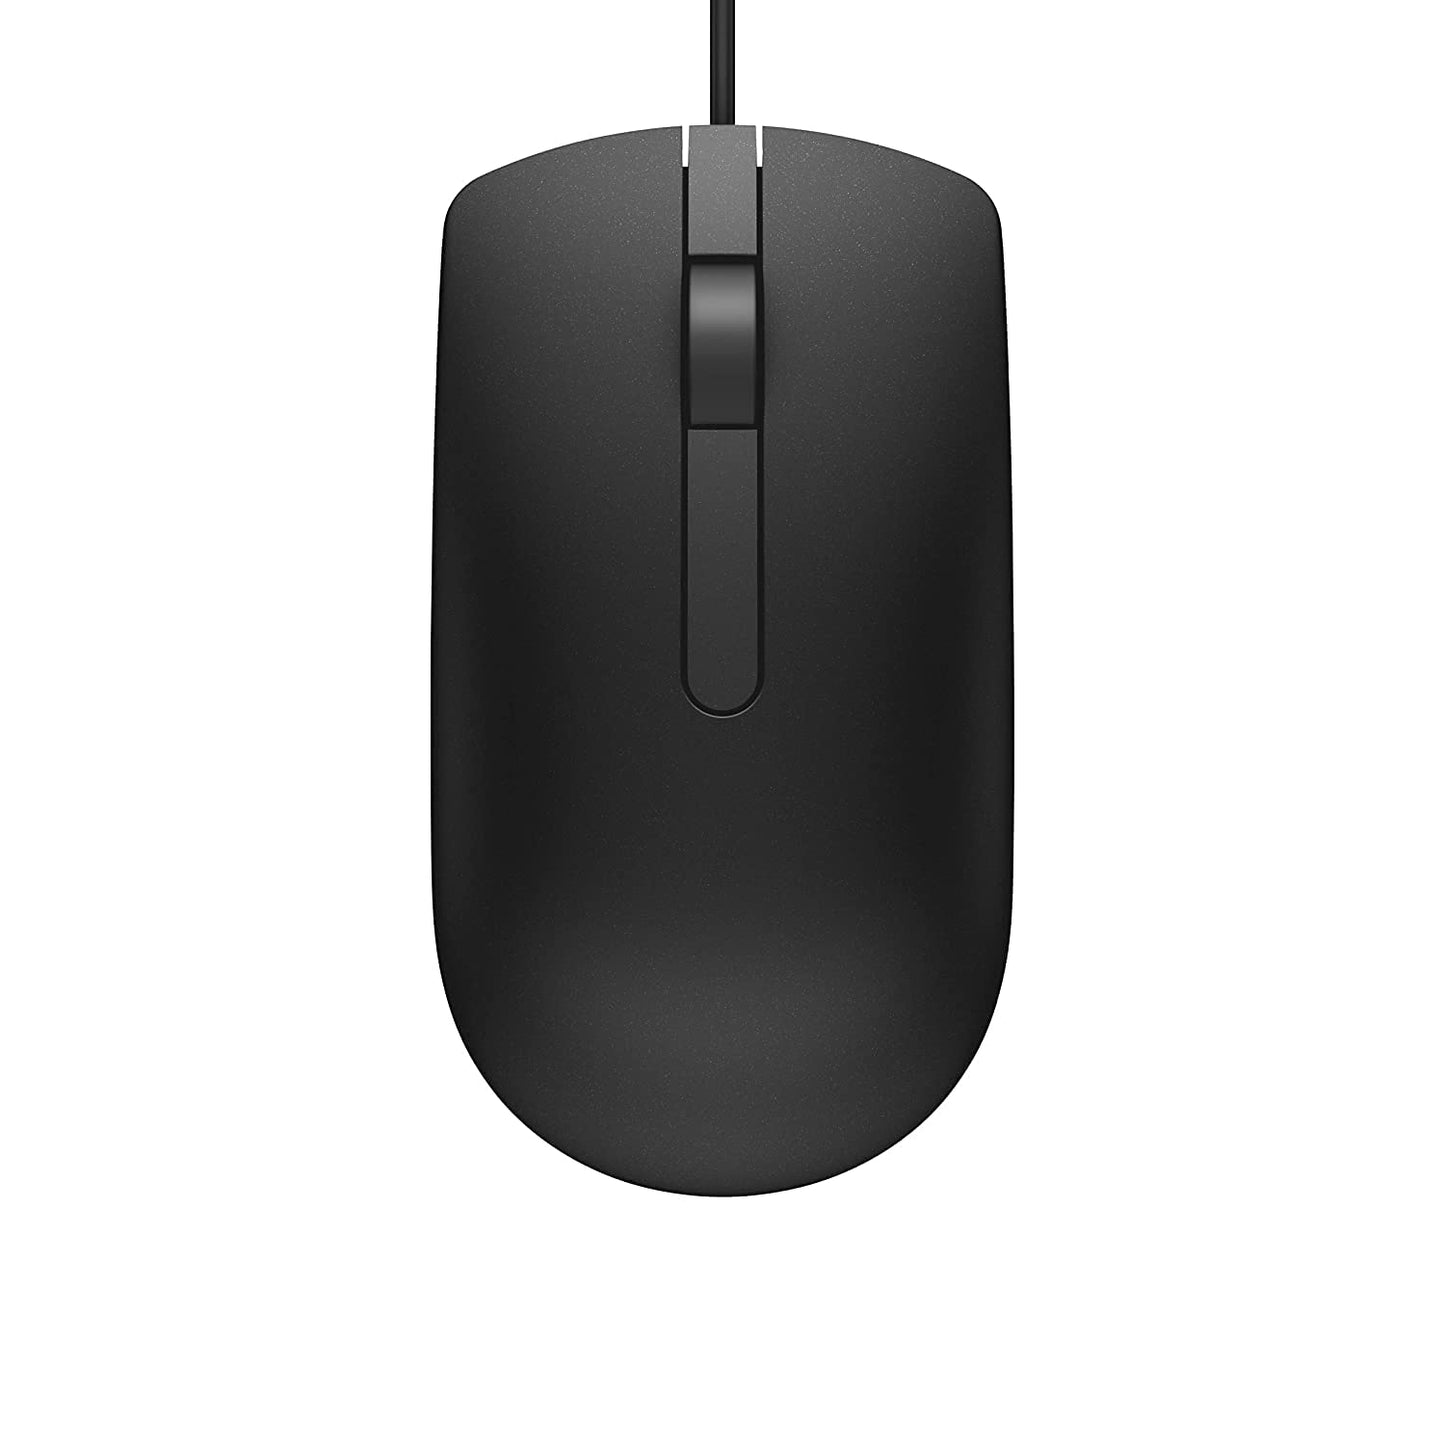 Dell MS116 Wired Optical Mouse, 1000Dpi, Led Tracking, Scrolling Wheel, Plug and Play